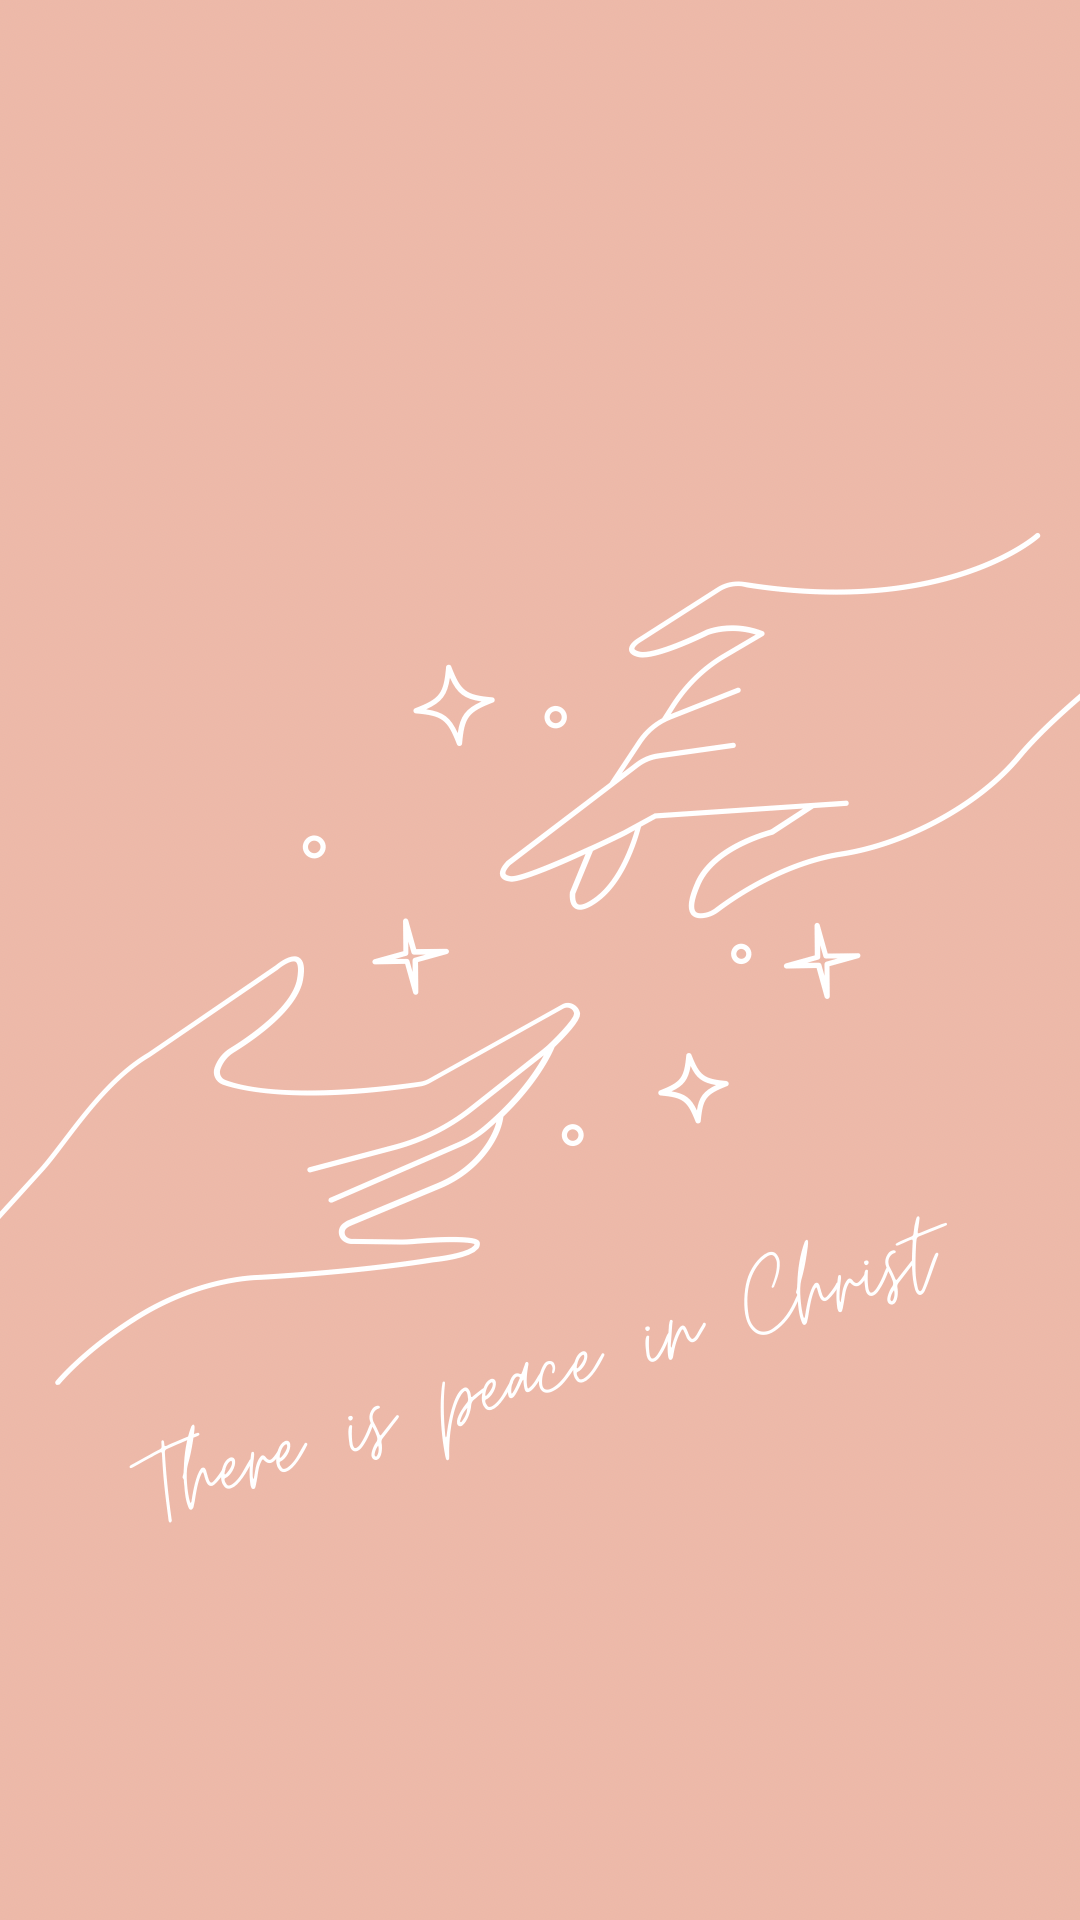 A poster with the words there is peace in christ - Jesus, Libra, peace